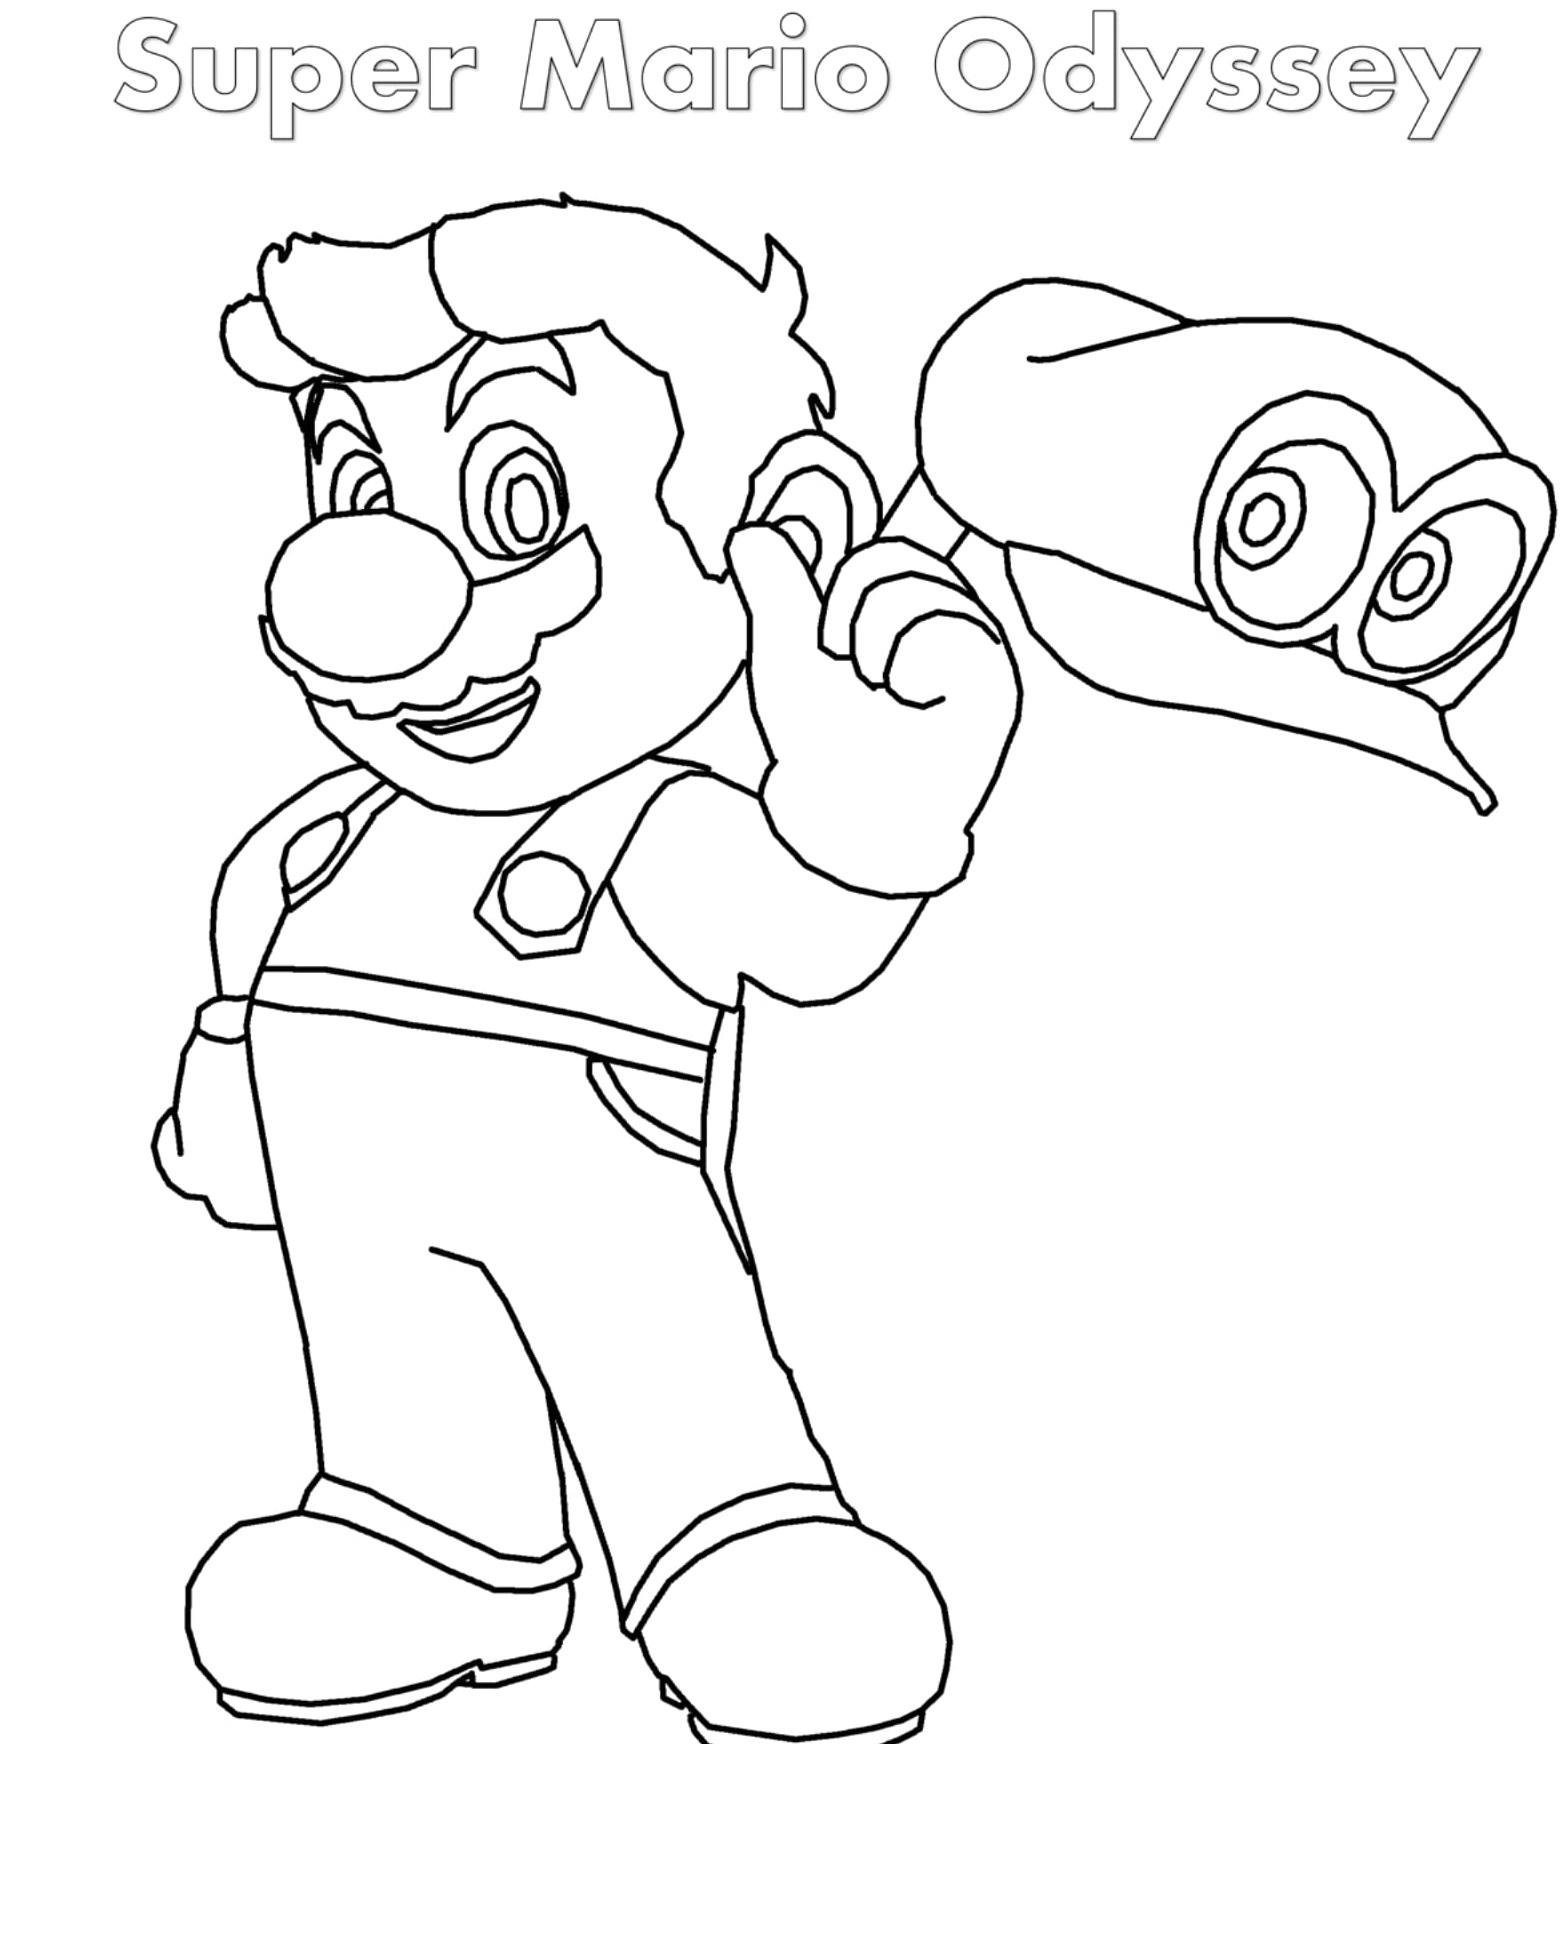 mario odyssey free coloring pages